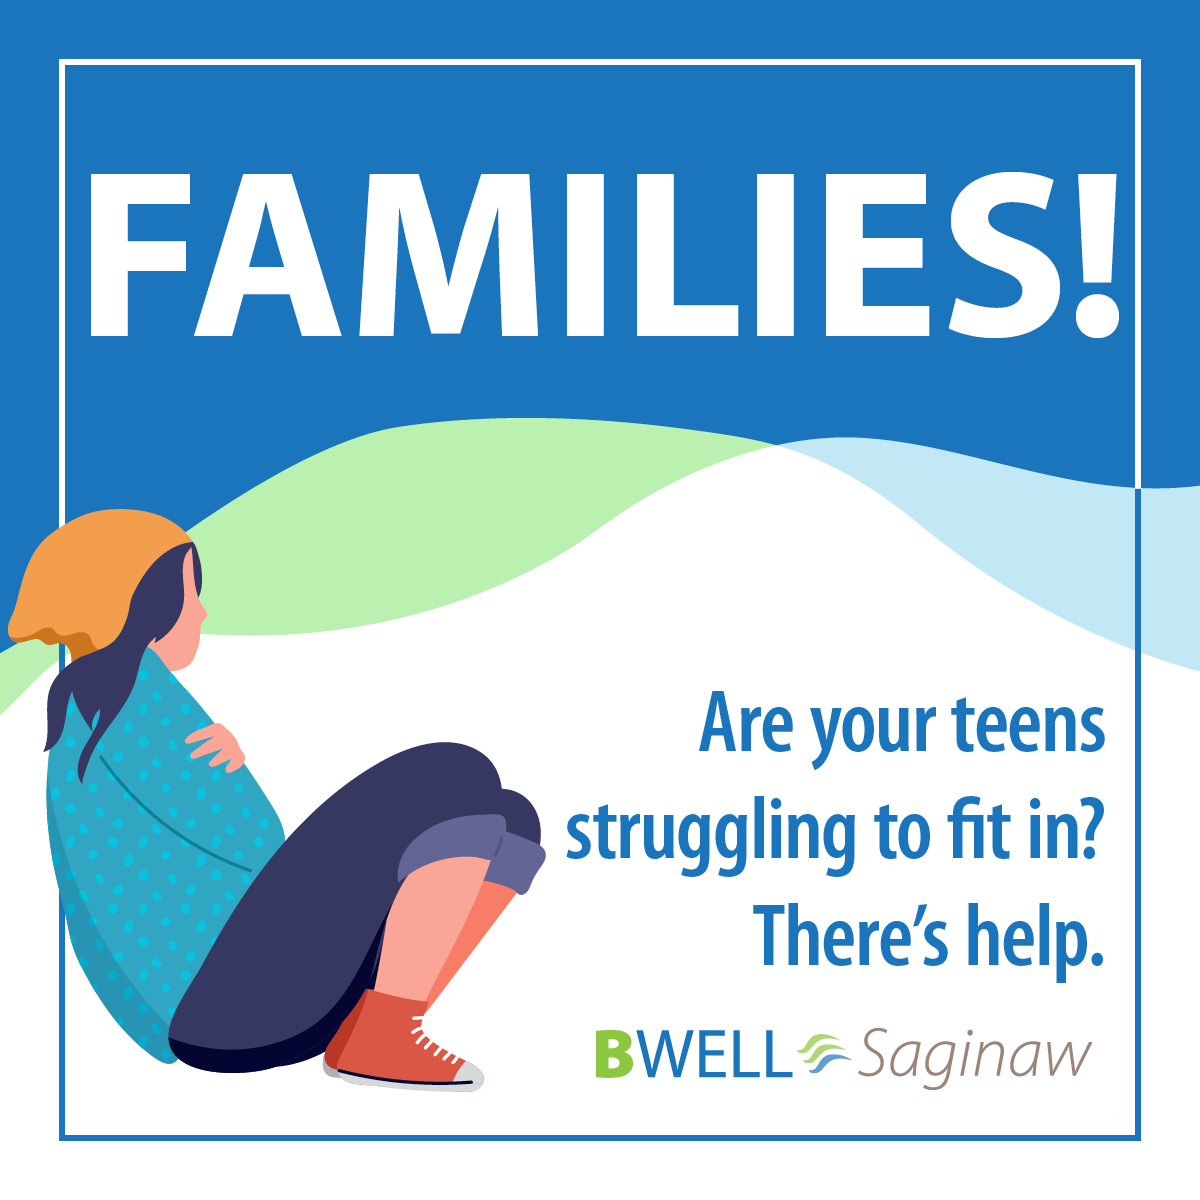 Are your teens struggling to fit in? There’s help.